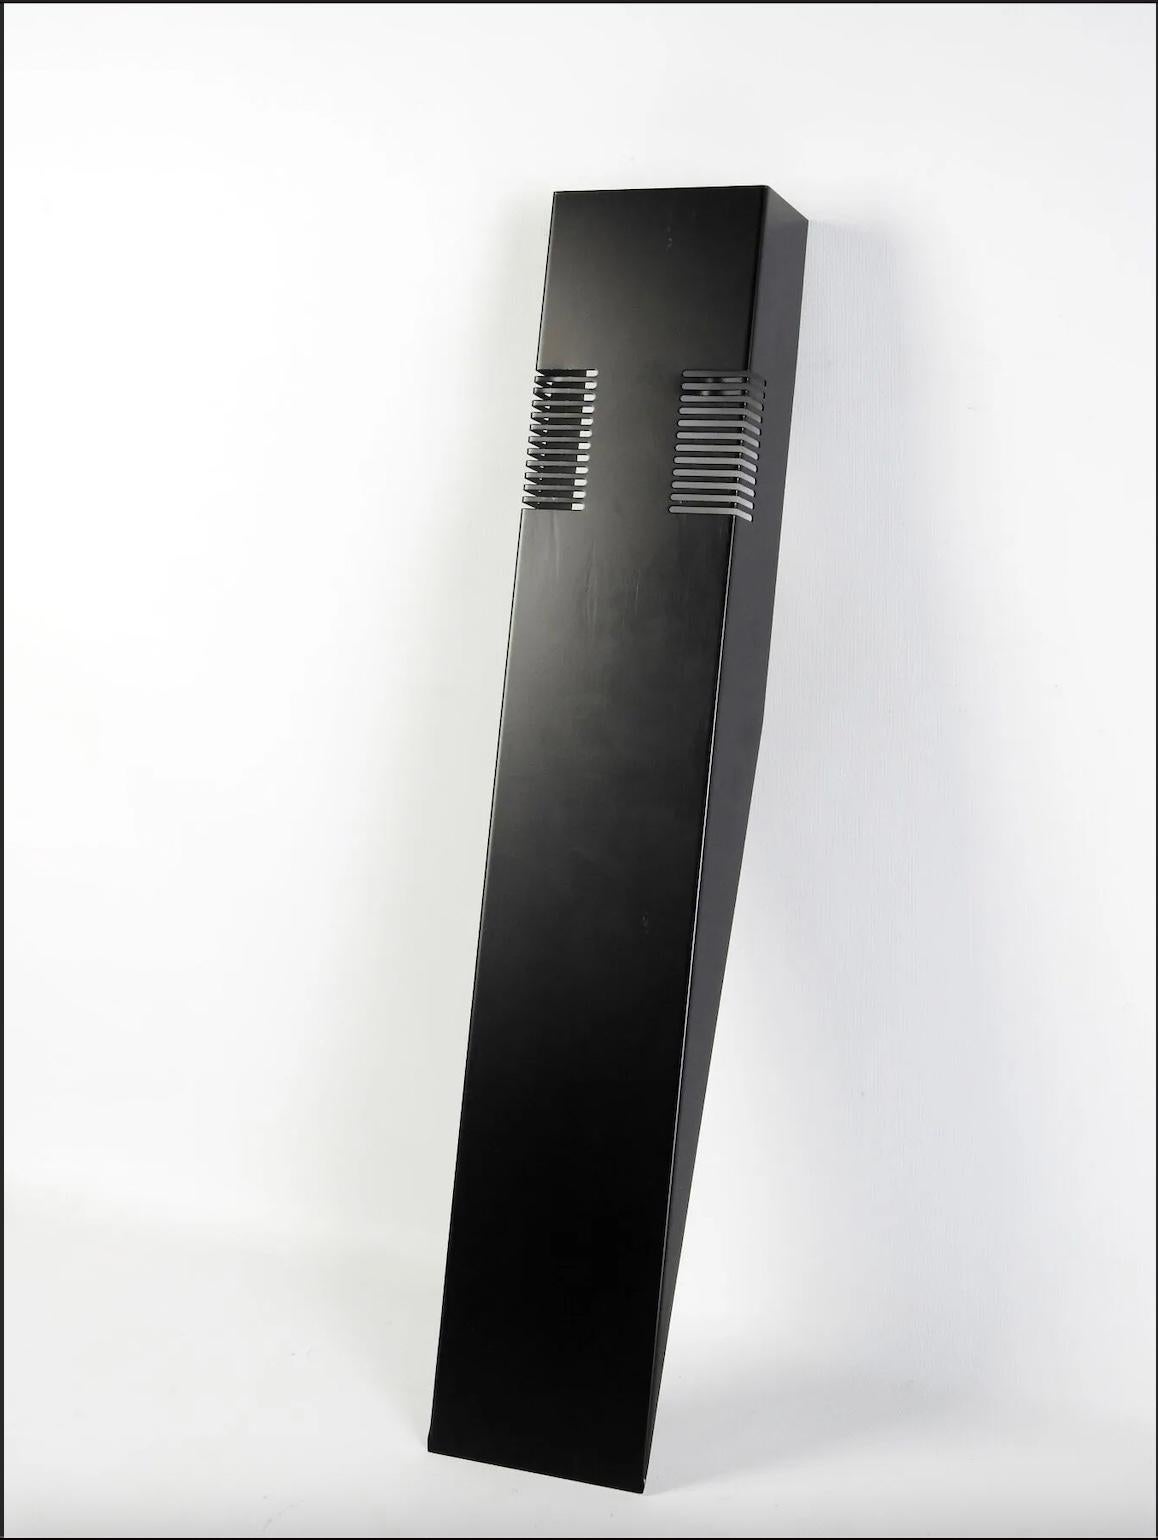 Jean Allemand (1948-), wall lamp, circa 1987

Black lacquered metal, halogen

Height 61 x Width 11 x Depth Max. 10 cm